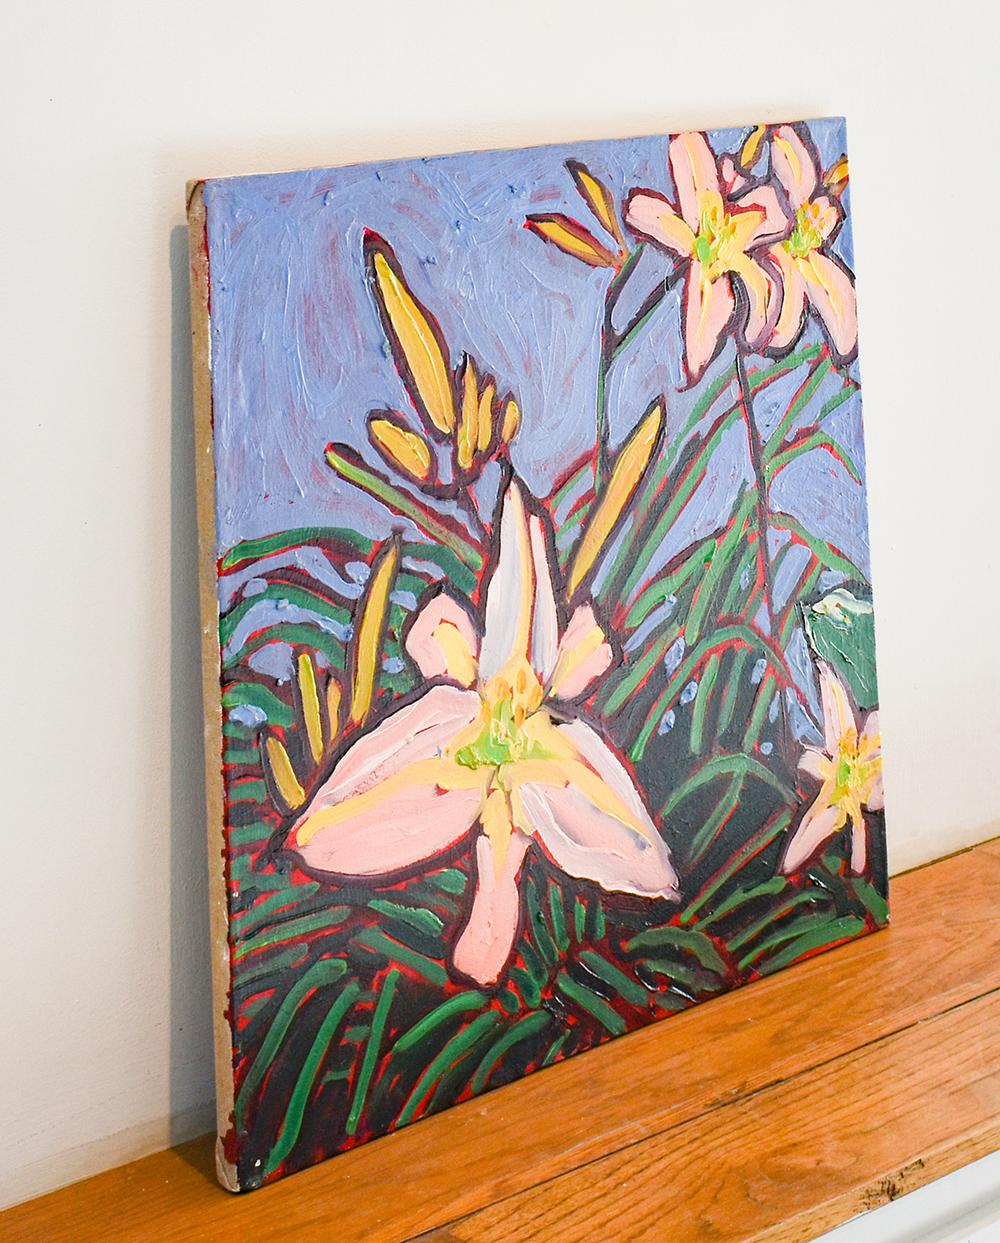 Summer Day Lilies (Fauvist Style Floral Still Life Painting on Canvas) - Gray Still-Life Painting by Dan Rupe